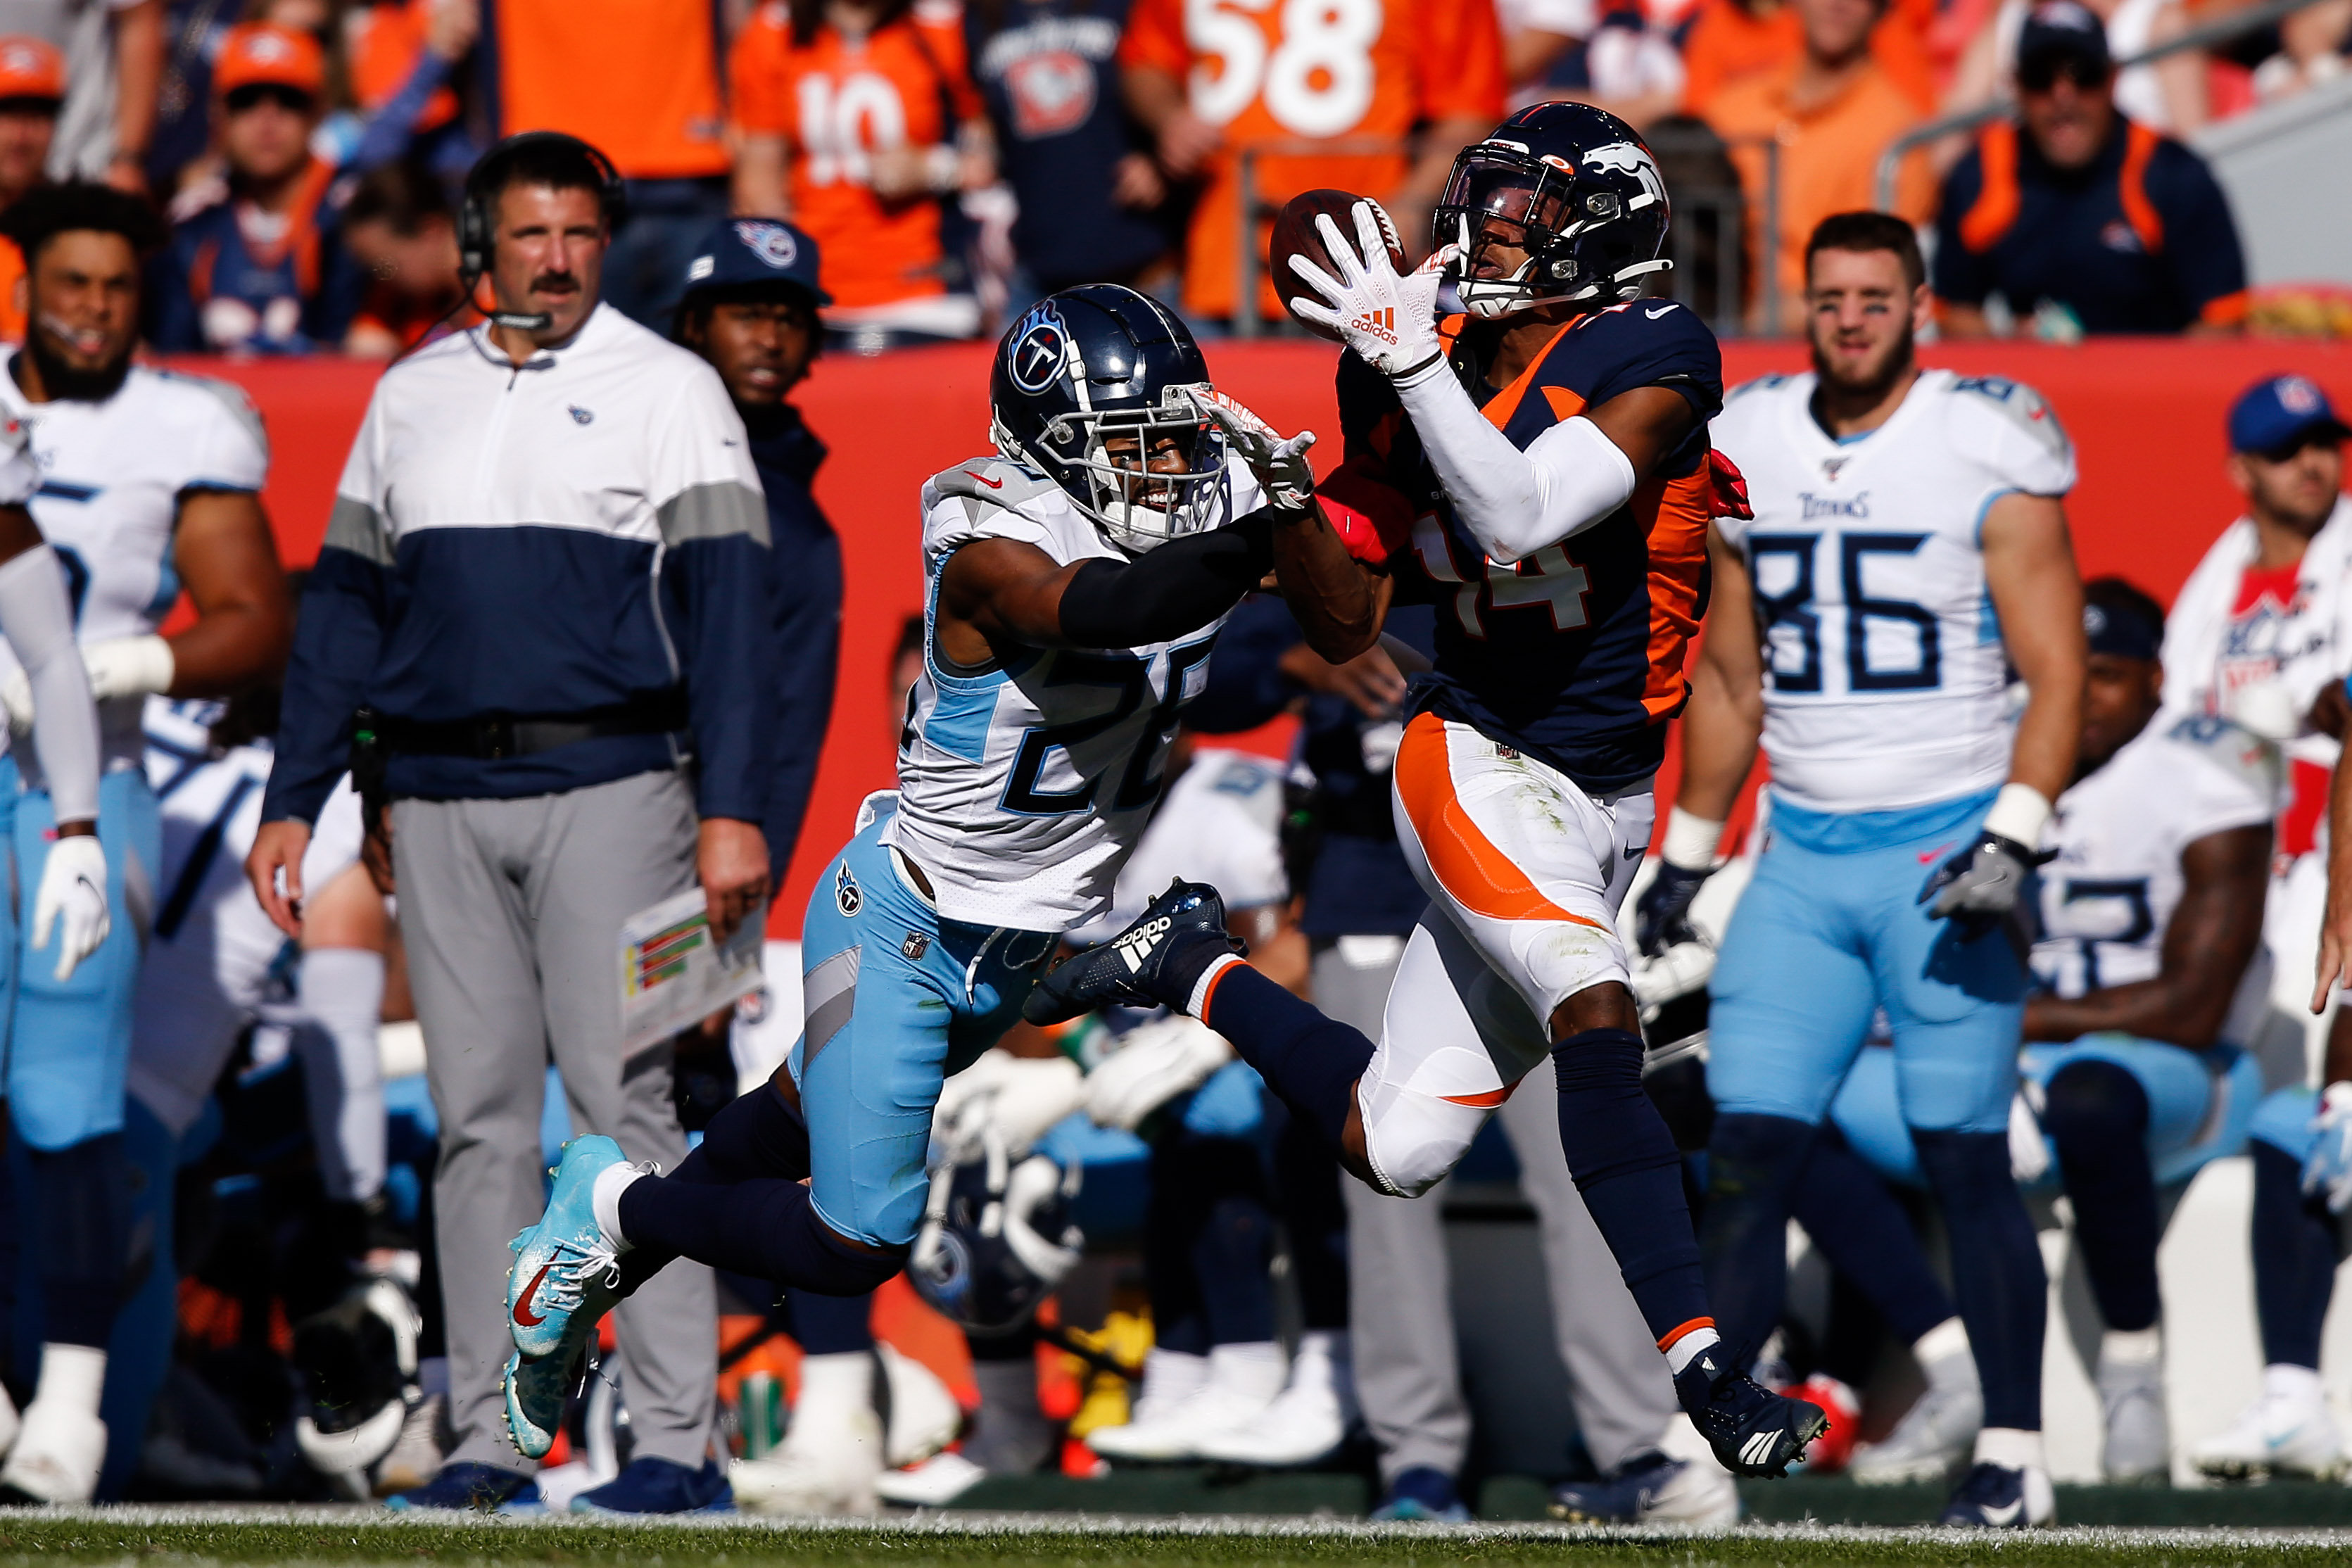 Denver Broncos wide receiver Courtland Sutton (14) makes a catch under pressure from Tennessee Titans cornerback Logan Ryan (26) in the second quarter at Empower Field at Mile High. Mandatory Credit